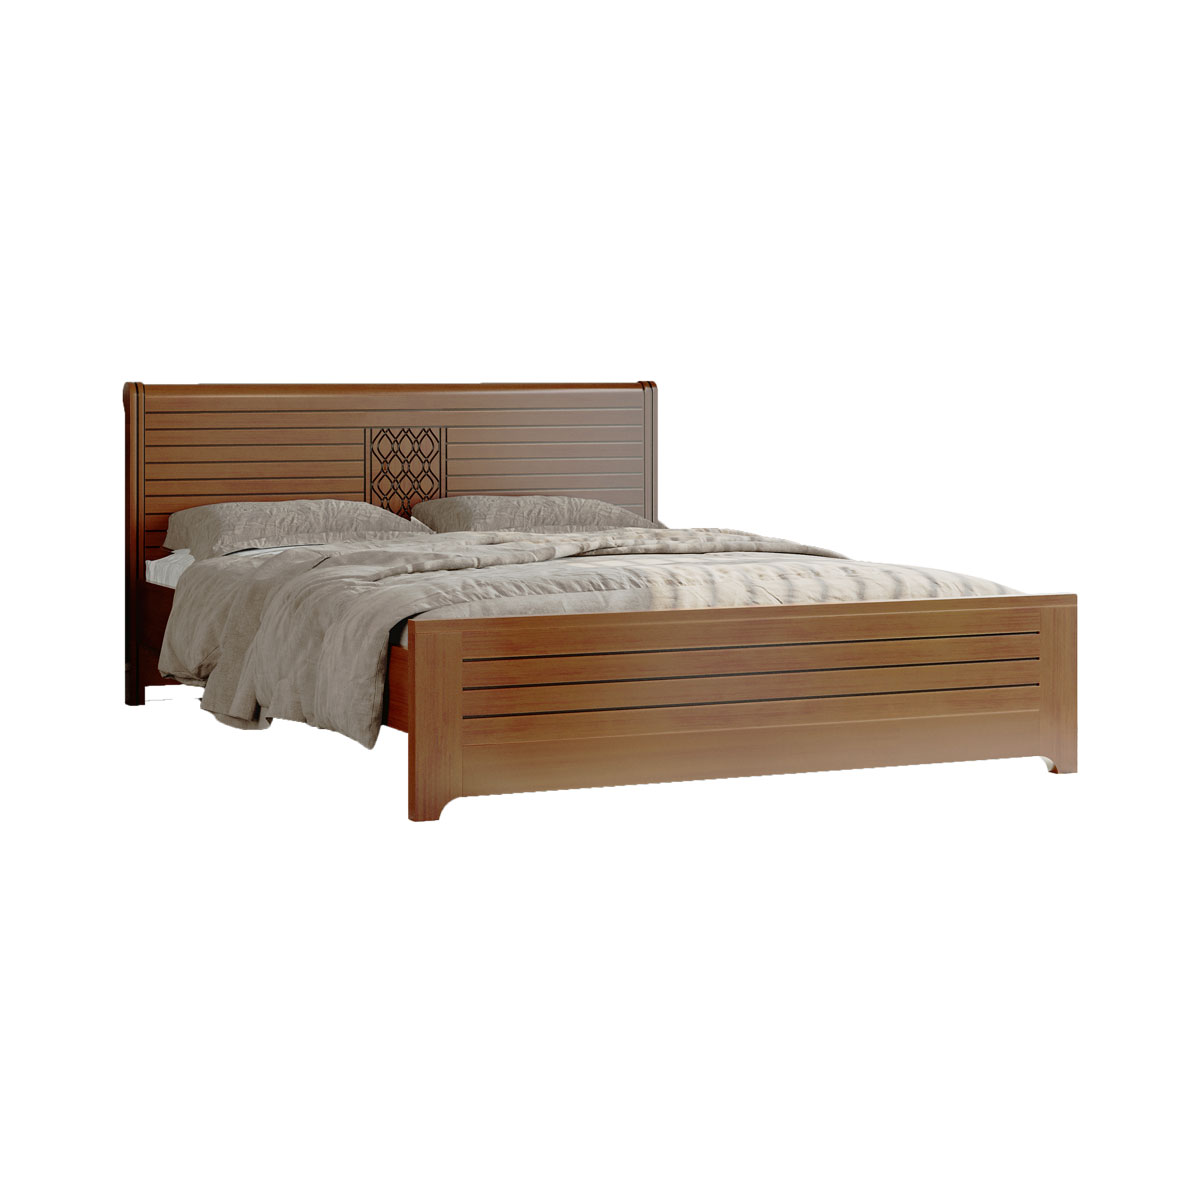 Wooden King Bed | BDH-359-3-1-20